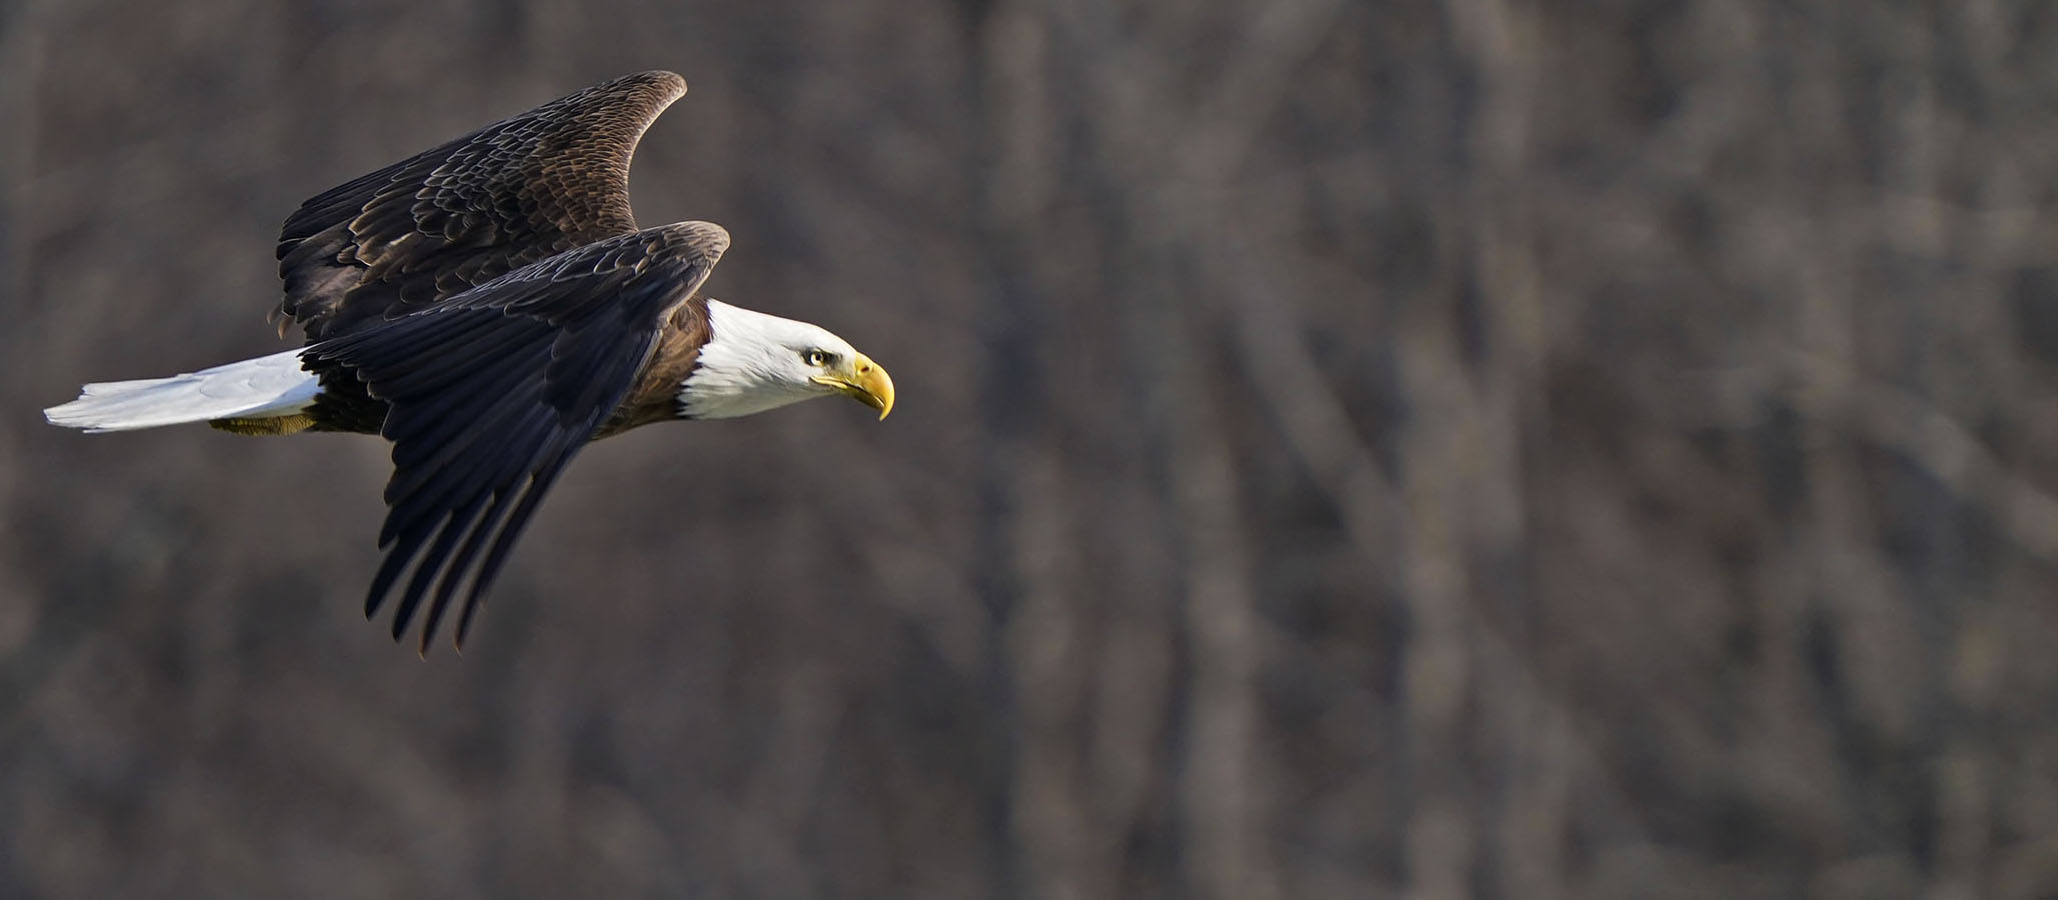 Bald eagle soaring against a Middle Tennessee landscape of winter trees